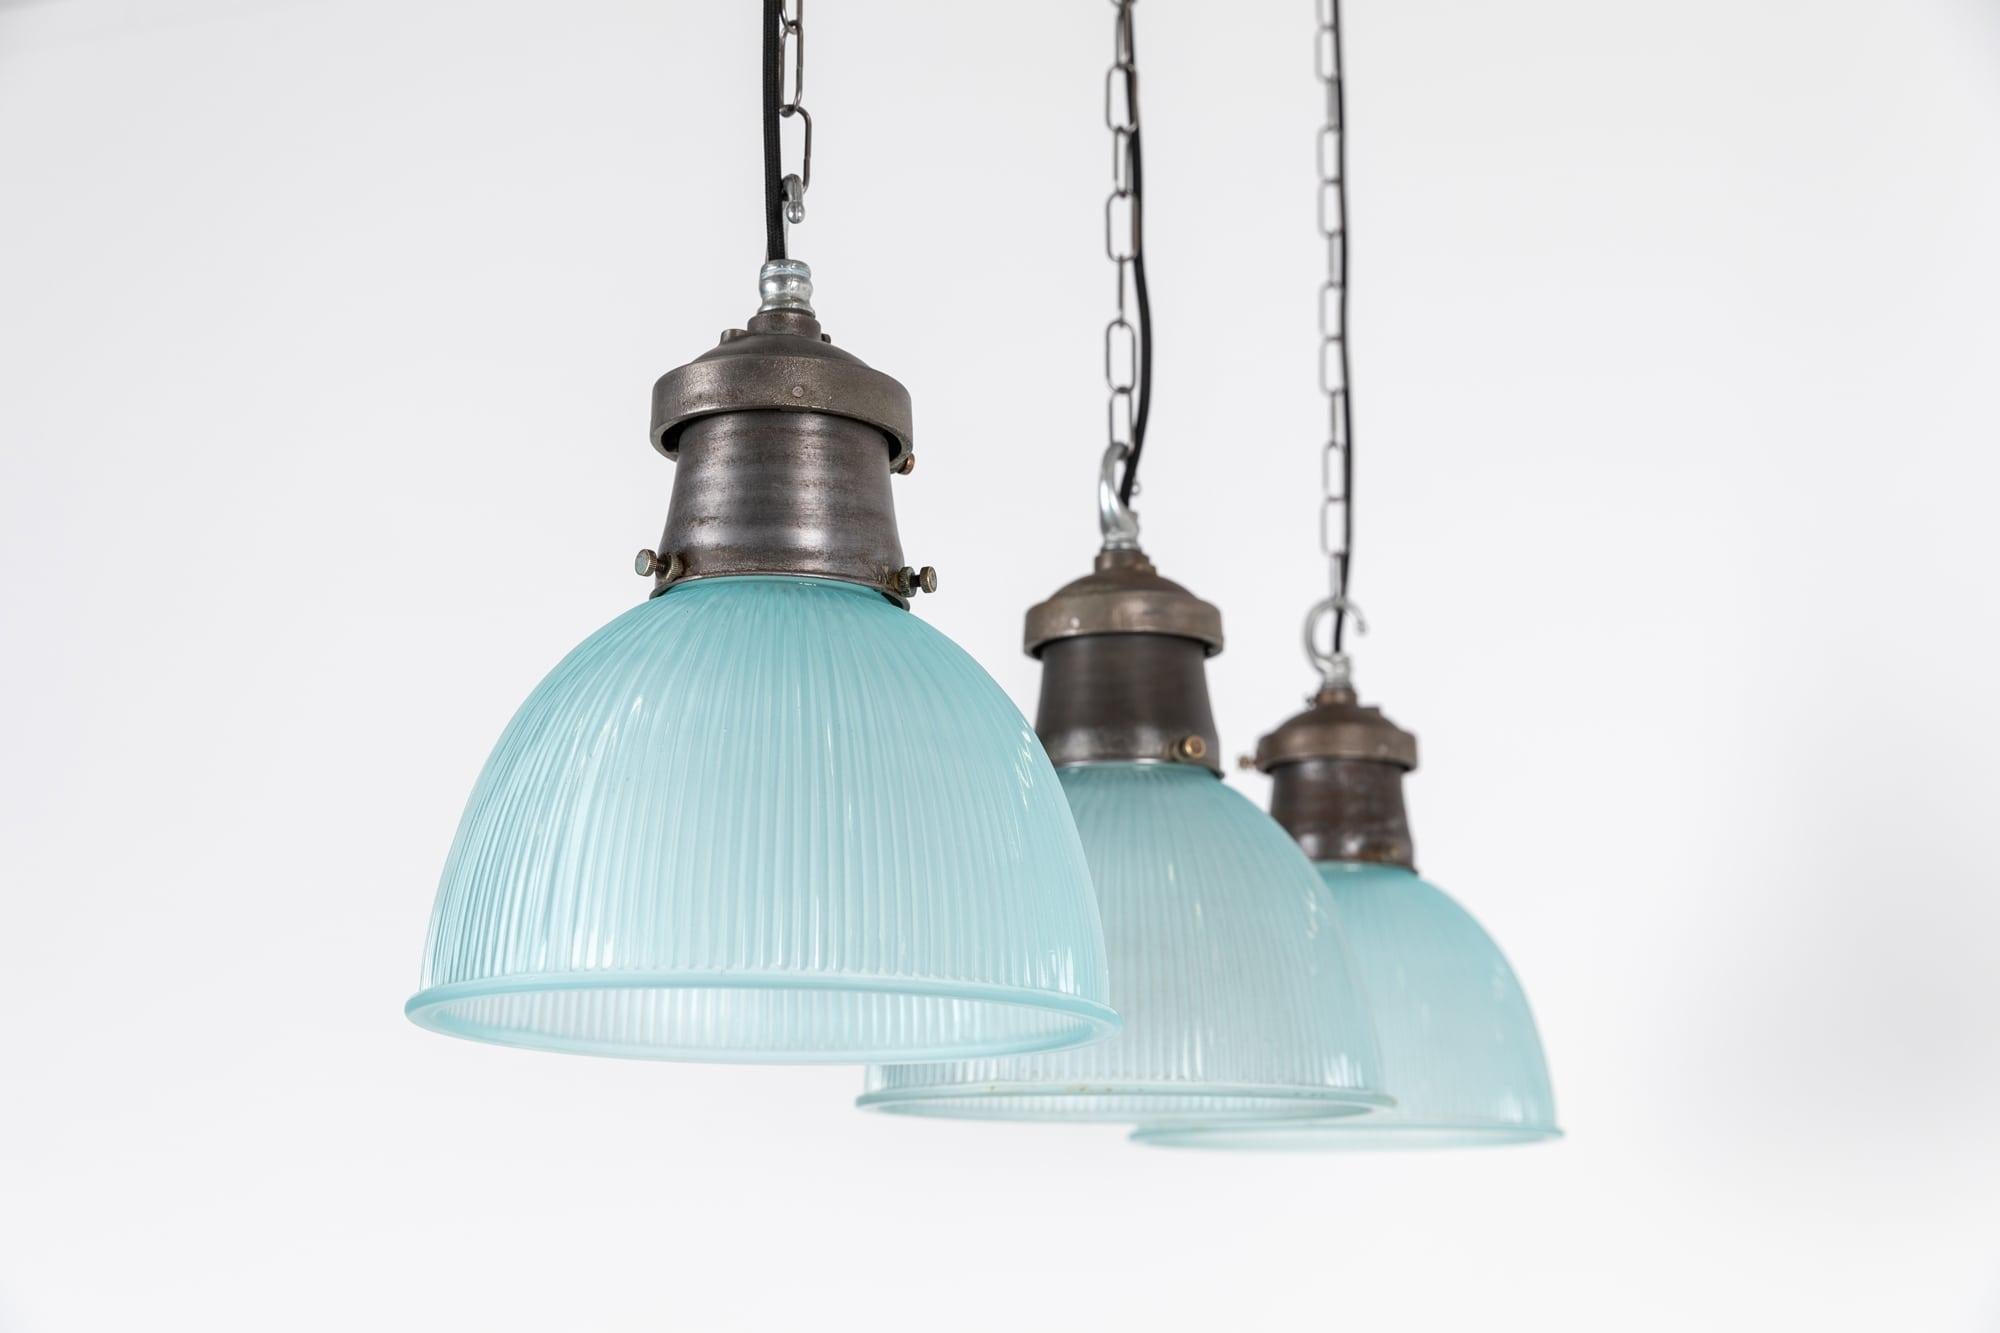 40 available!

An incredible run of scarcely found blue tinted pendants made in England by Holophane. c.1930

Beauitful crisp prismatic glass reflectors and original industrial cast galleries, both bearing the Holophane makers mark. Salvaged from a